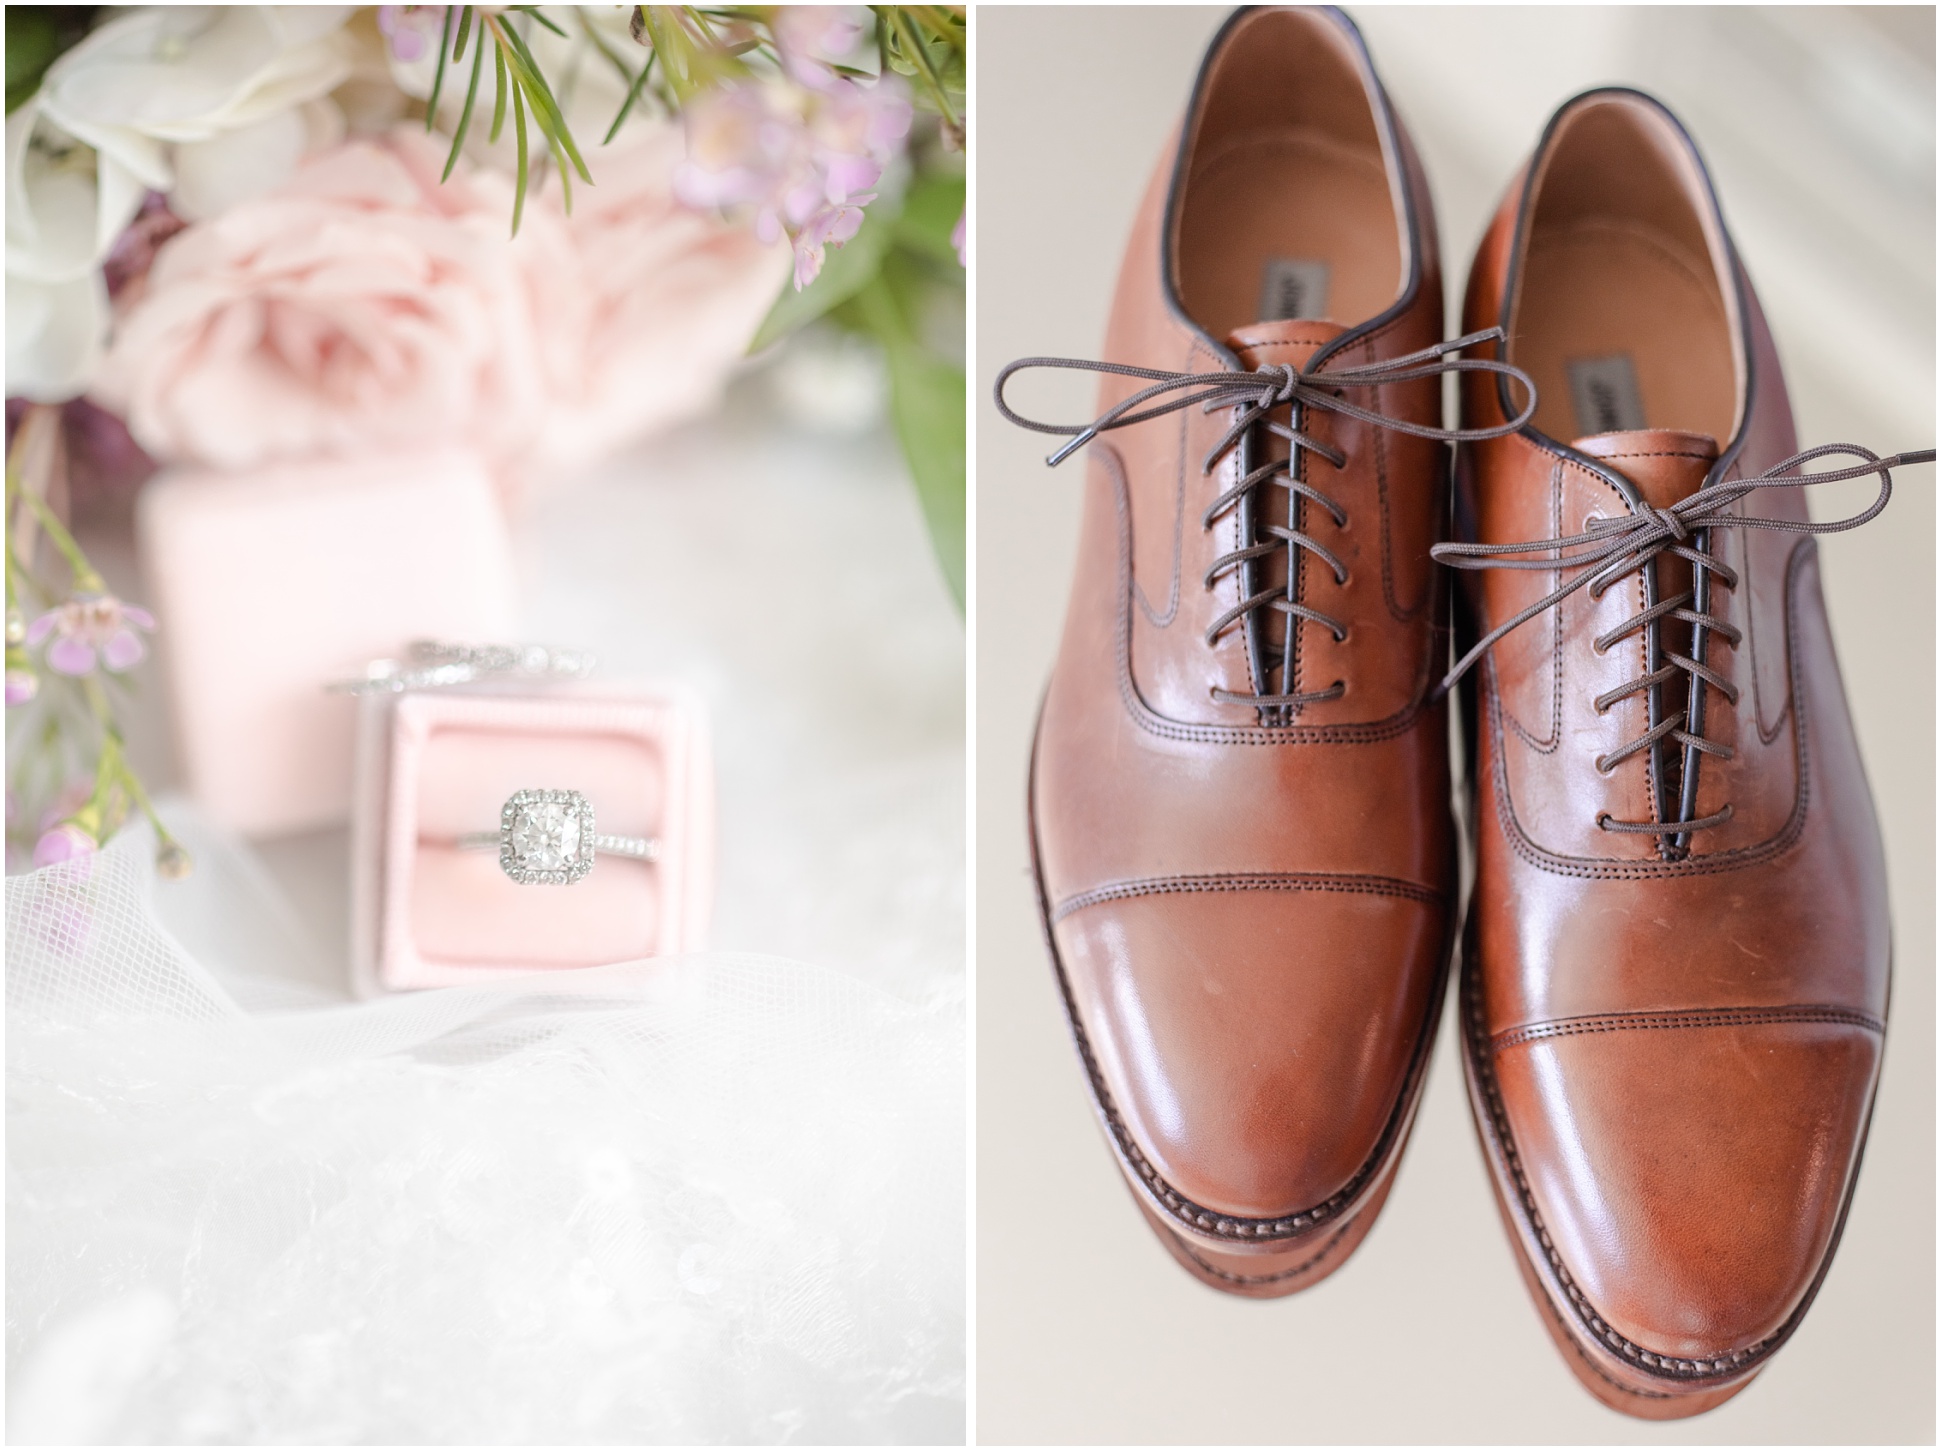 over view of diamond wedding ring in light pink box; groom's brown dress shoes